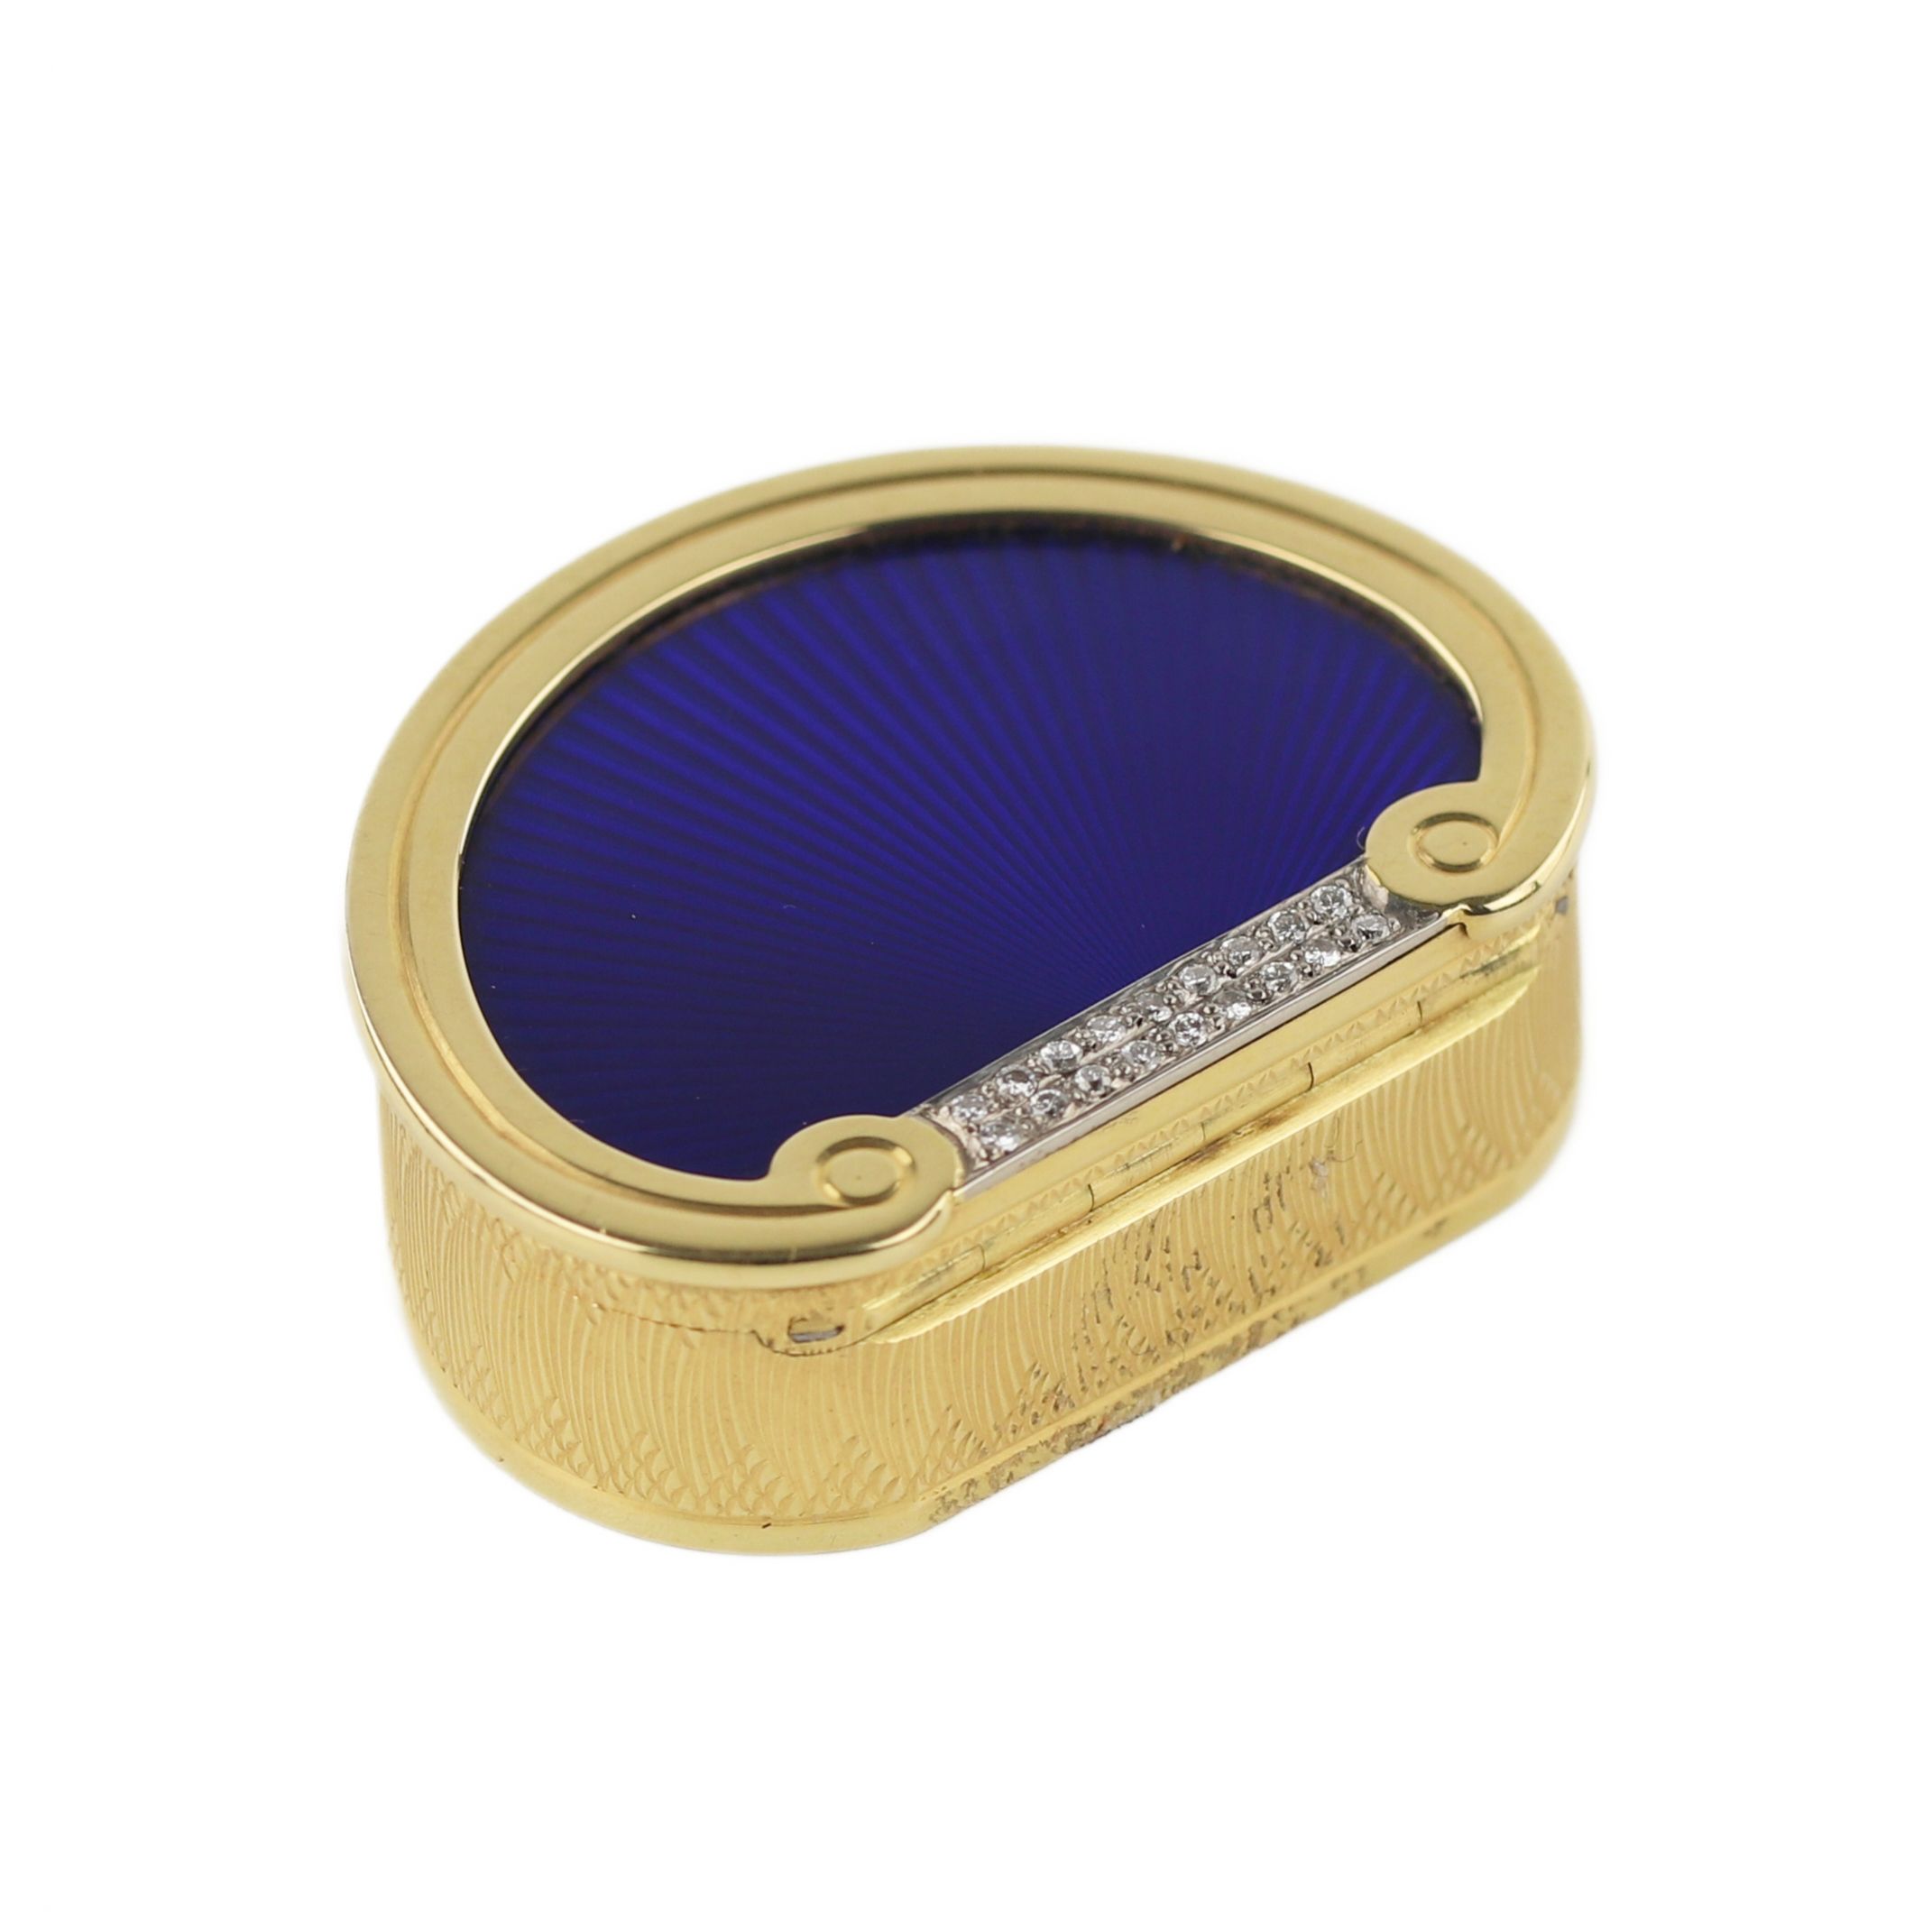 19th century English gold pill box with diamonds and guilloche enamel. - Image 2 of 8